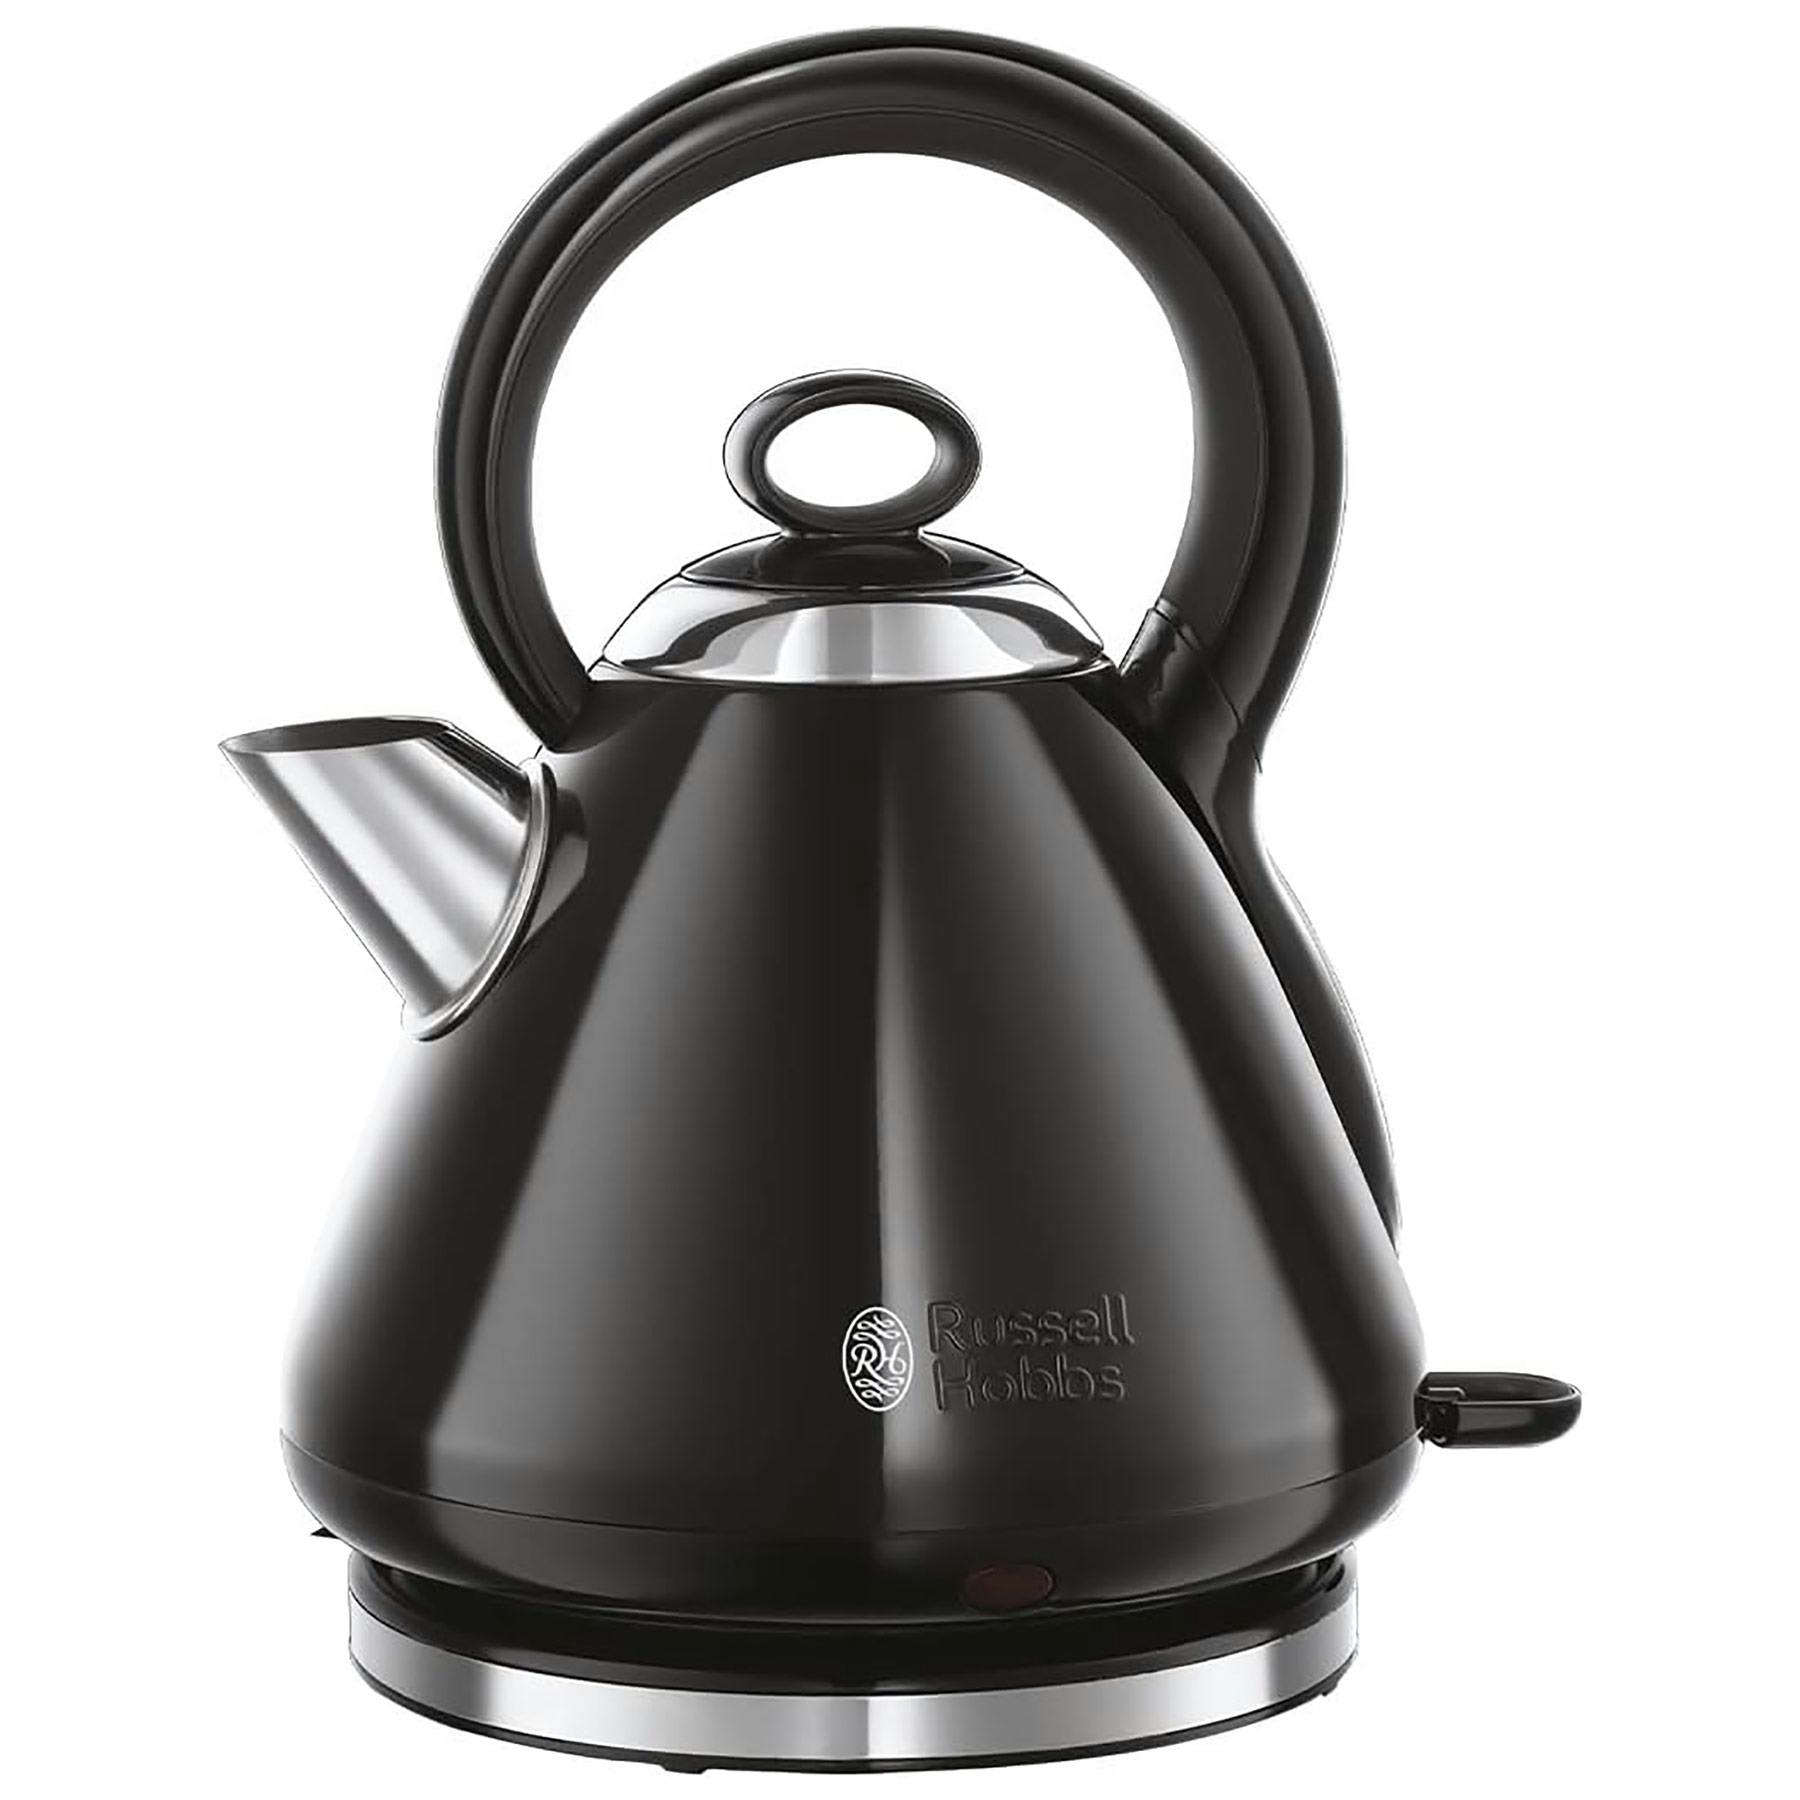 Russell Hobbs Stainless Steel 8-Cup Cordless Electric Kettle at